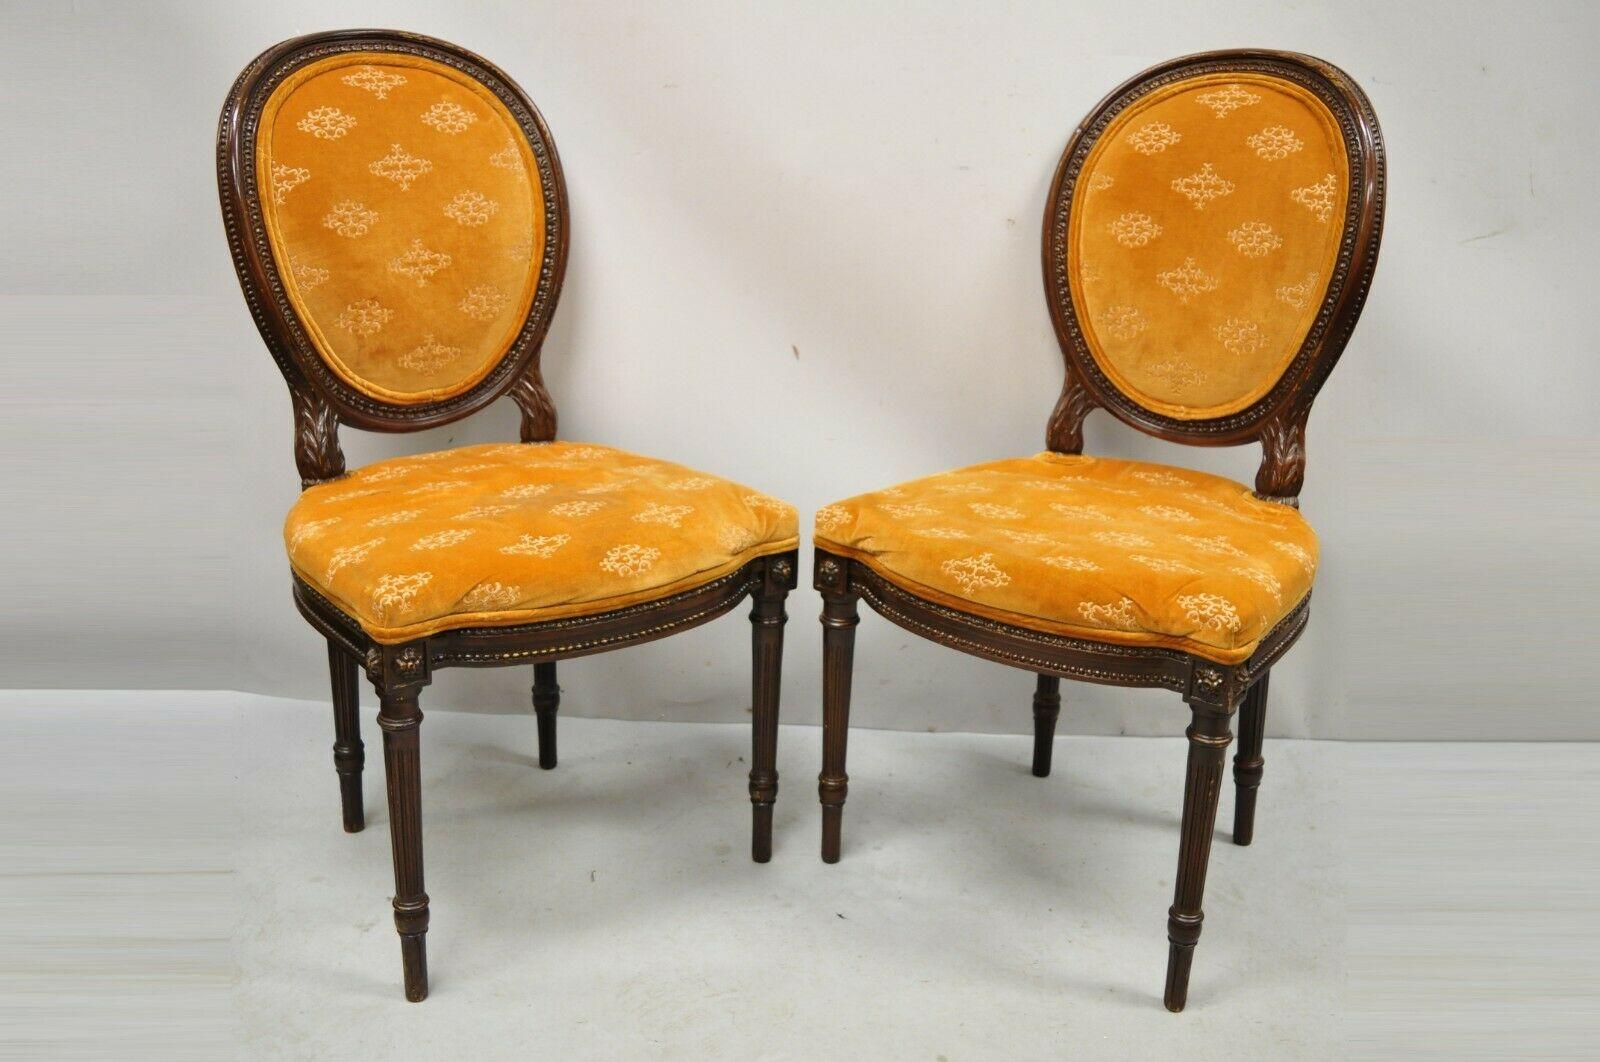 Vintage French Louis XVI Style Carved Wood Oval Back Dining Side Chairs - a Pair. Item features carved wood frames, upholstered oval backs, solid wood frames, nicely carved details, tapered legs, great style and form. Circa Mid 20th Century.